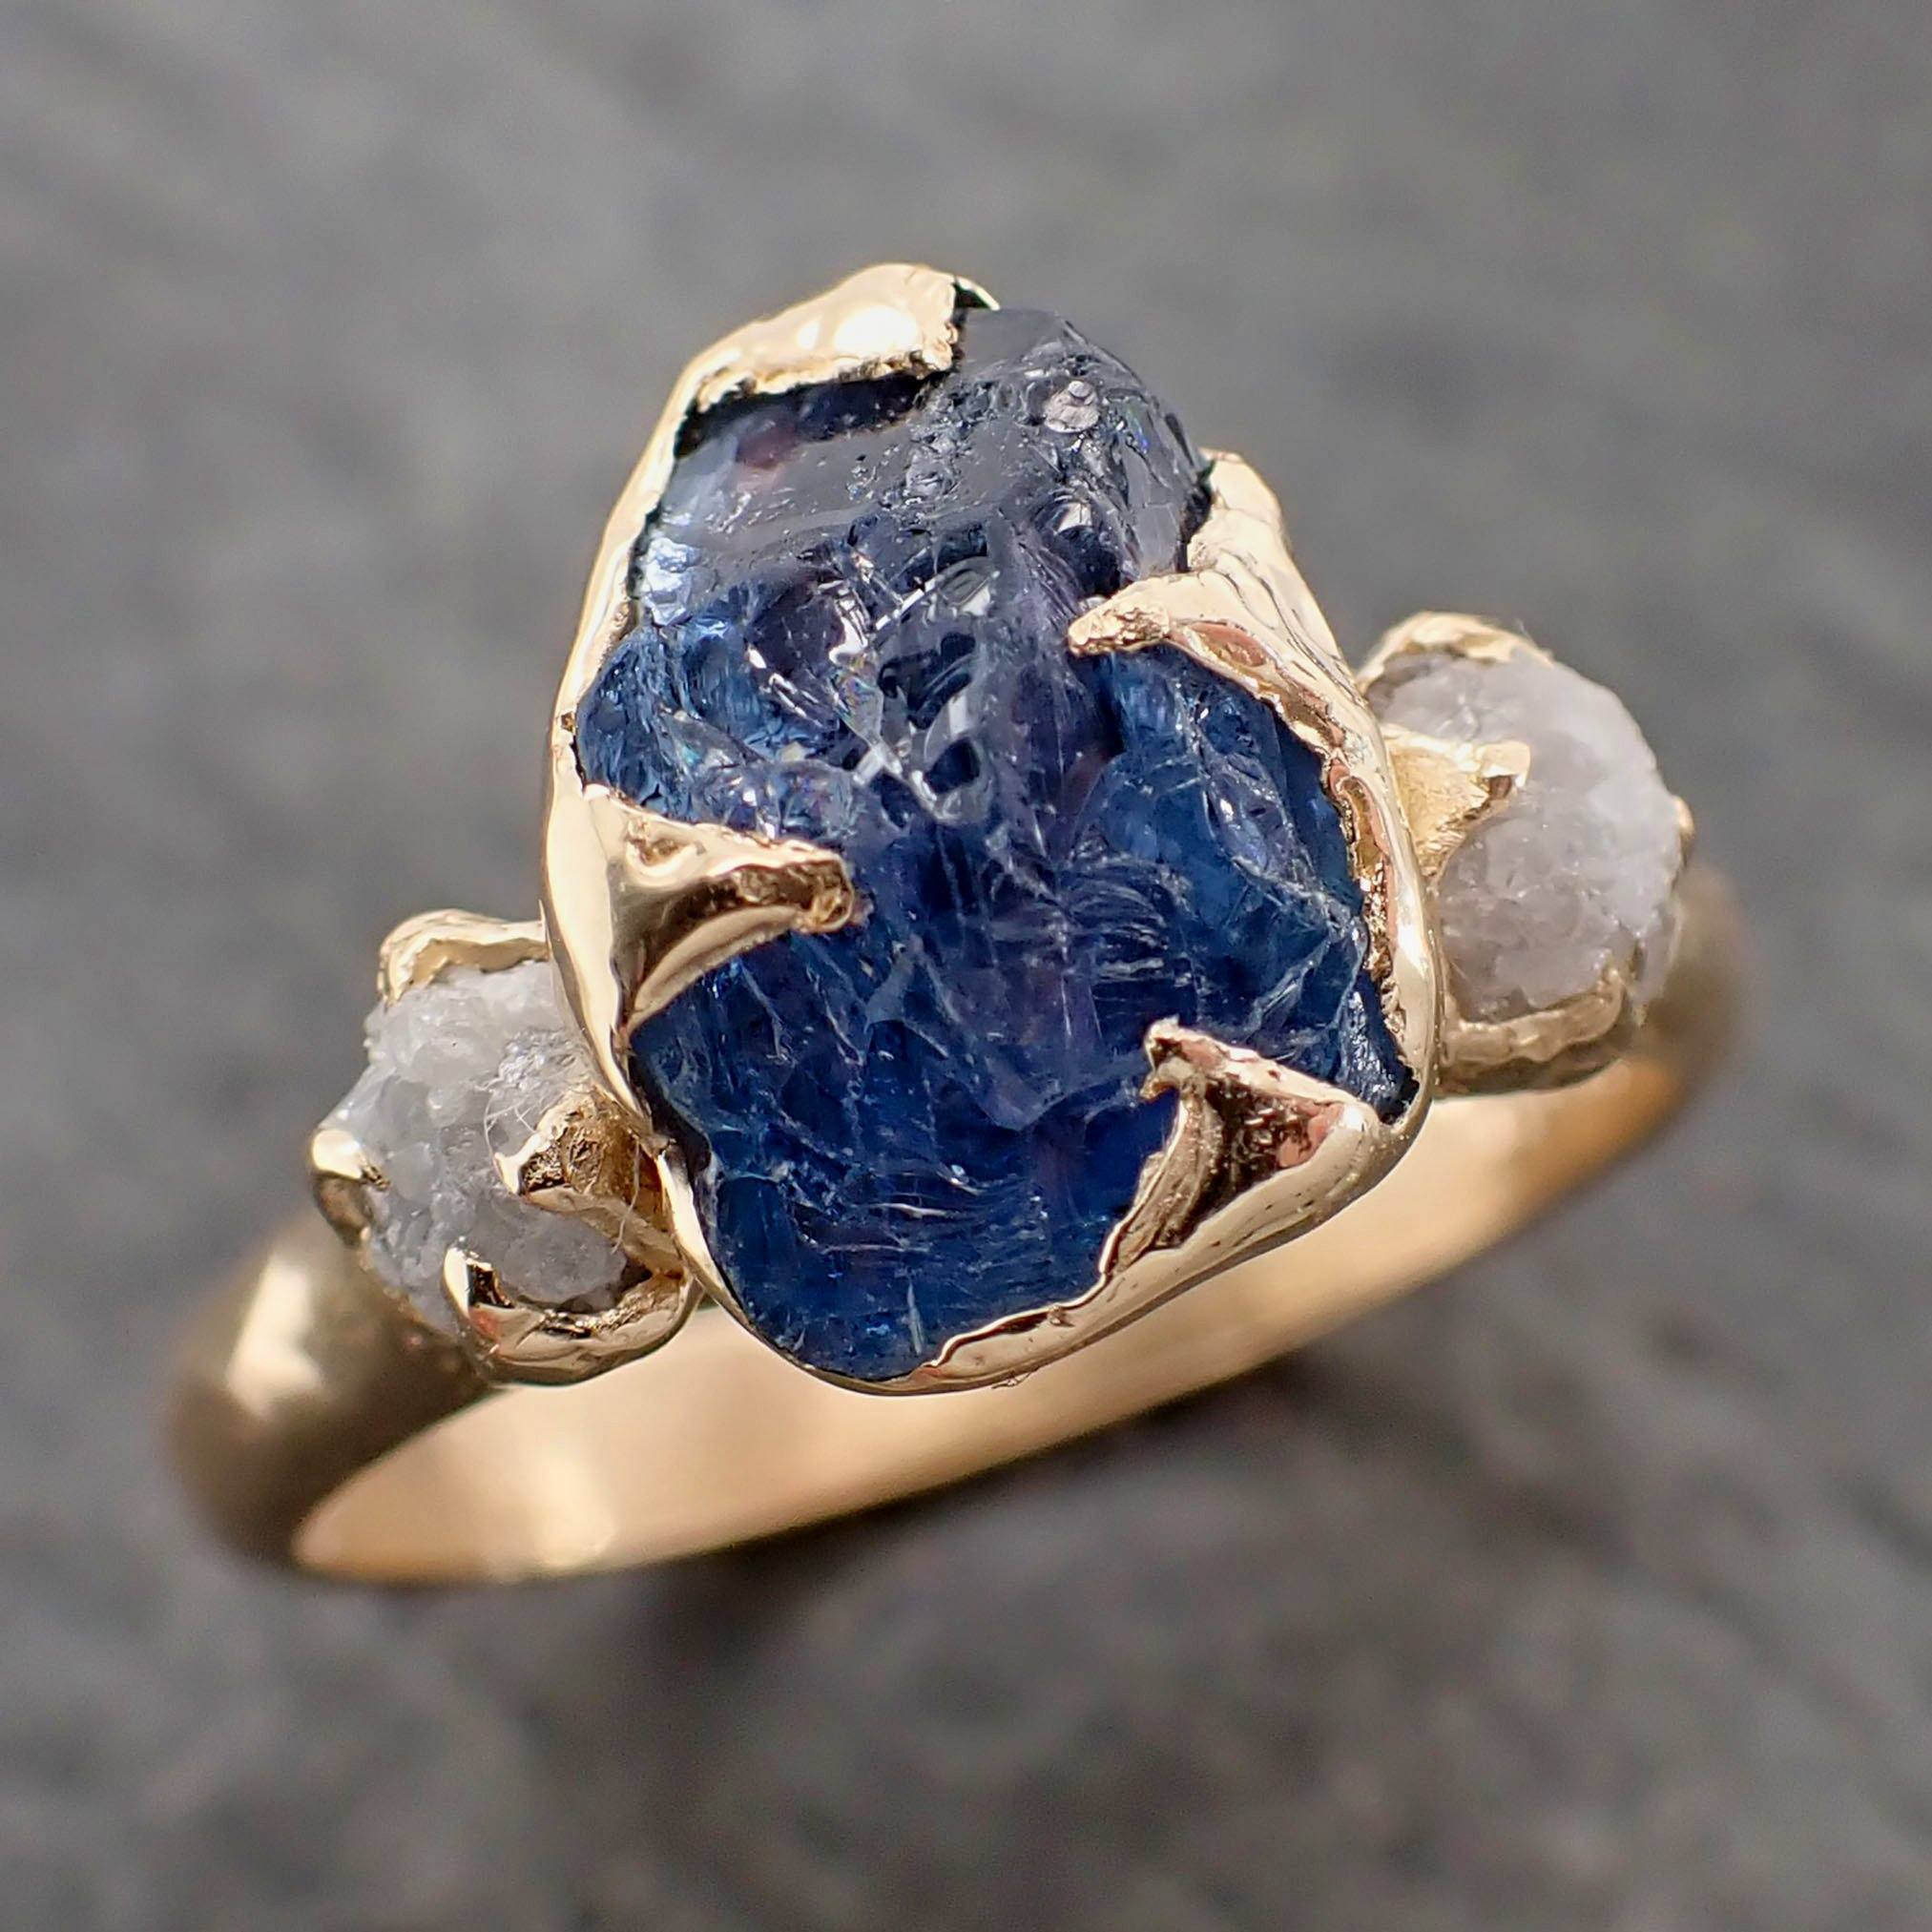 raw sapphire and rough diamond yellow 14k gold engagement ring wedding ring custom one of a kind gemstone multi stone ring 2156 Alternative Engagement